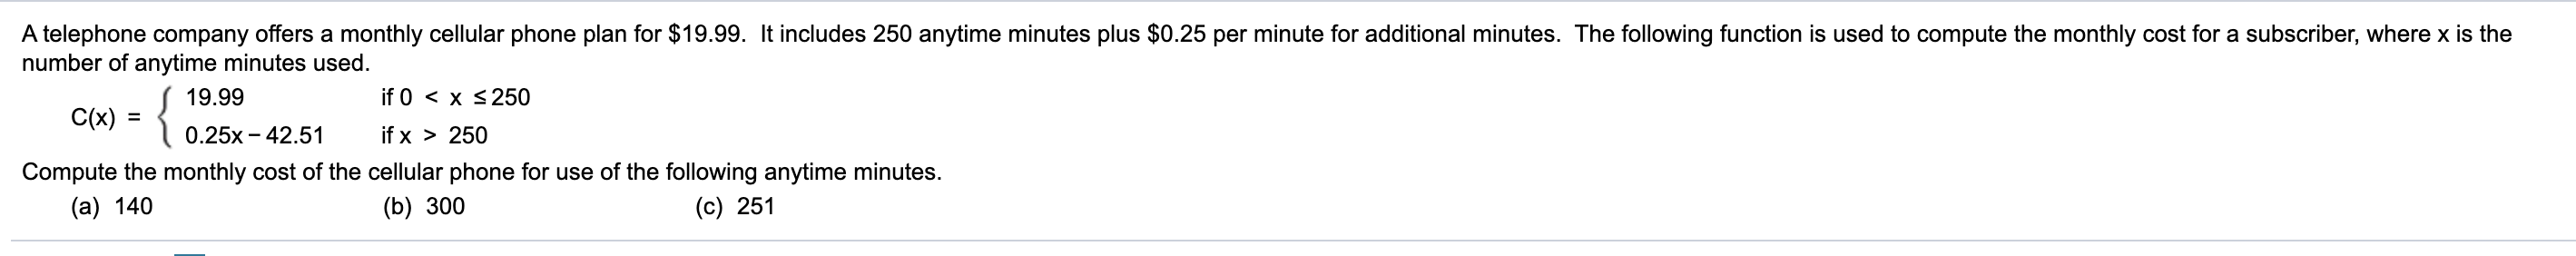 A telephone company offers a monthly cellular phone plan for $19.99. It includes 250 anytime minutes plus $0.25 per minute for additional minutes. The following function is used to compute the monthly cost for a subscriber, where x is the
number of anytime minutes used.
{
19.99
if 0 < x <250
C(x) =
%3D
0.25x - 42.51
if x > 250
Compute the monthly cost of the cellular phone for use of the following anytime minutes.
(c) 251
(a) 140
(b) 300
